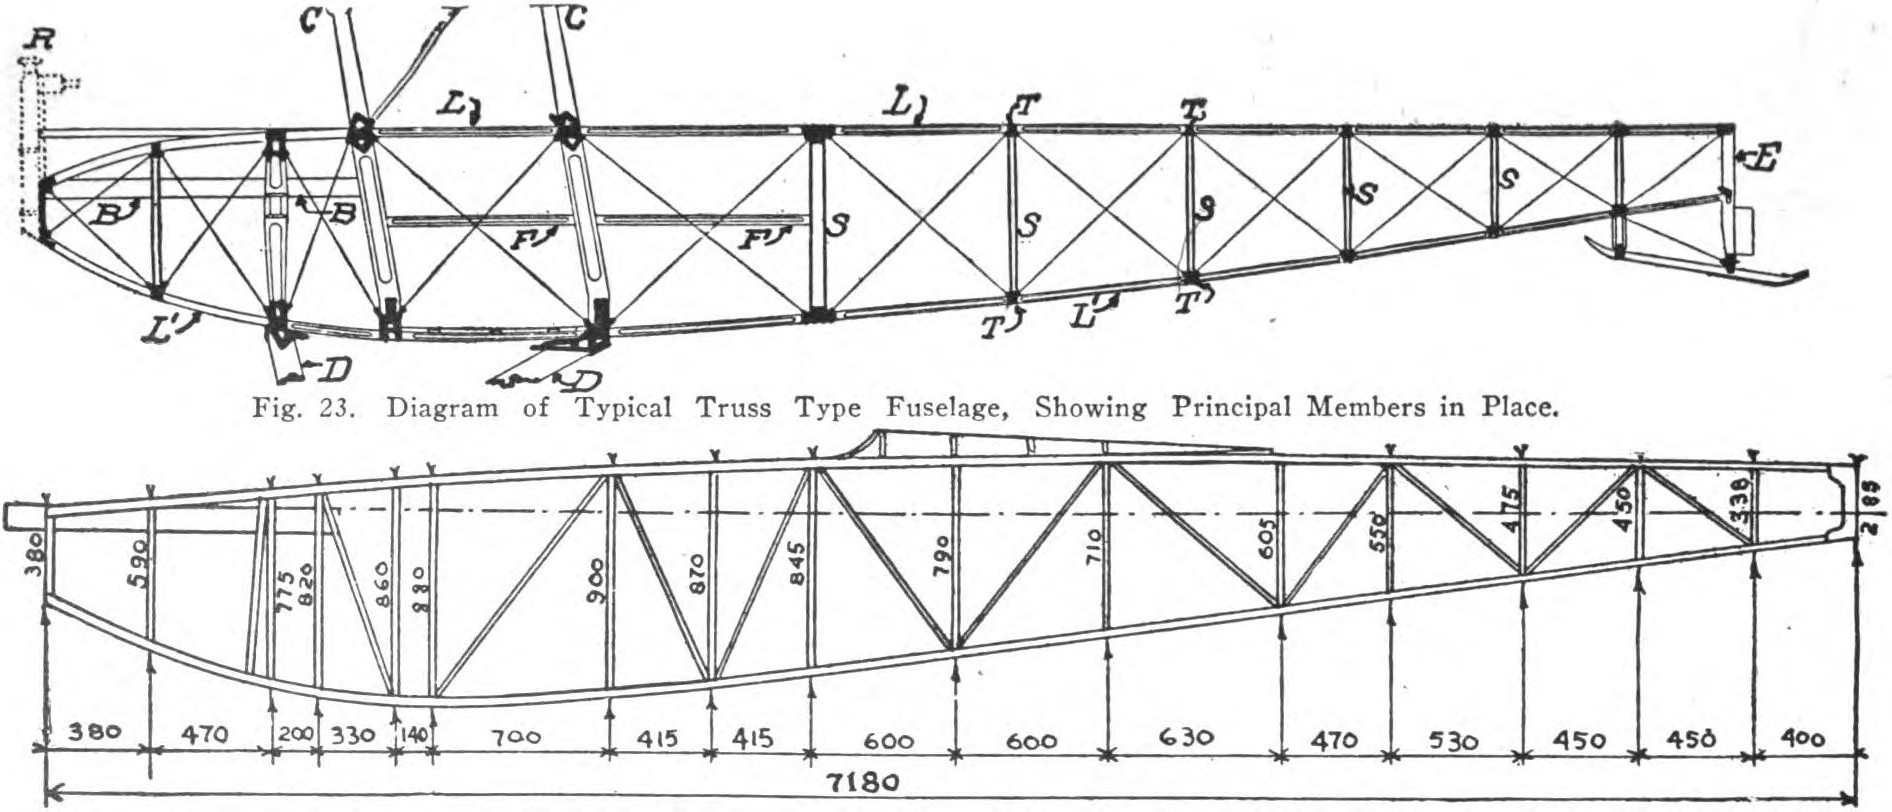 Diagram of Typical Truss Type Fuselage, Showing Principal Members in Place.